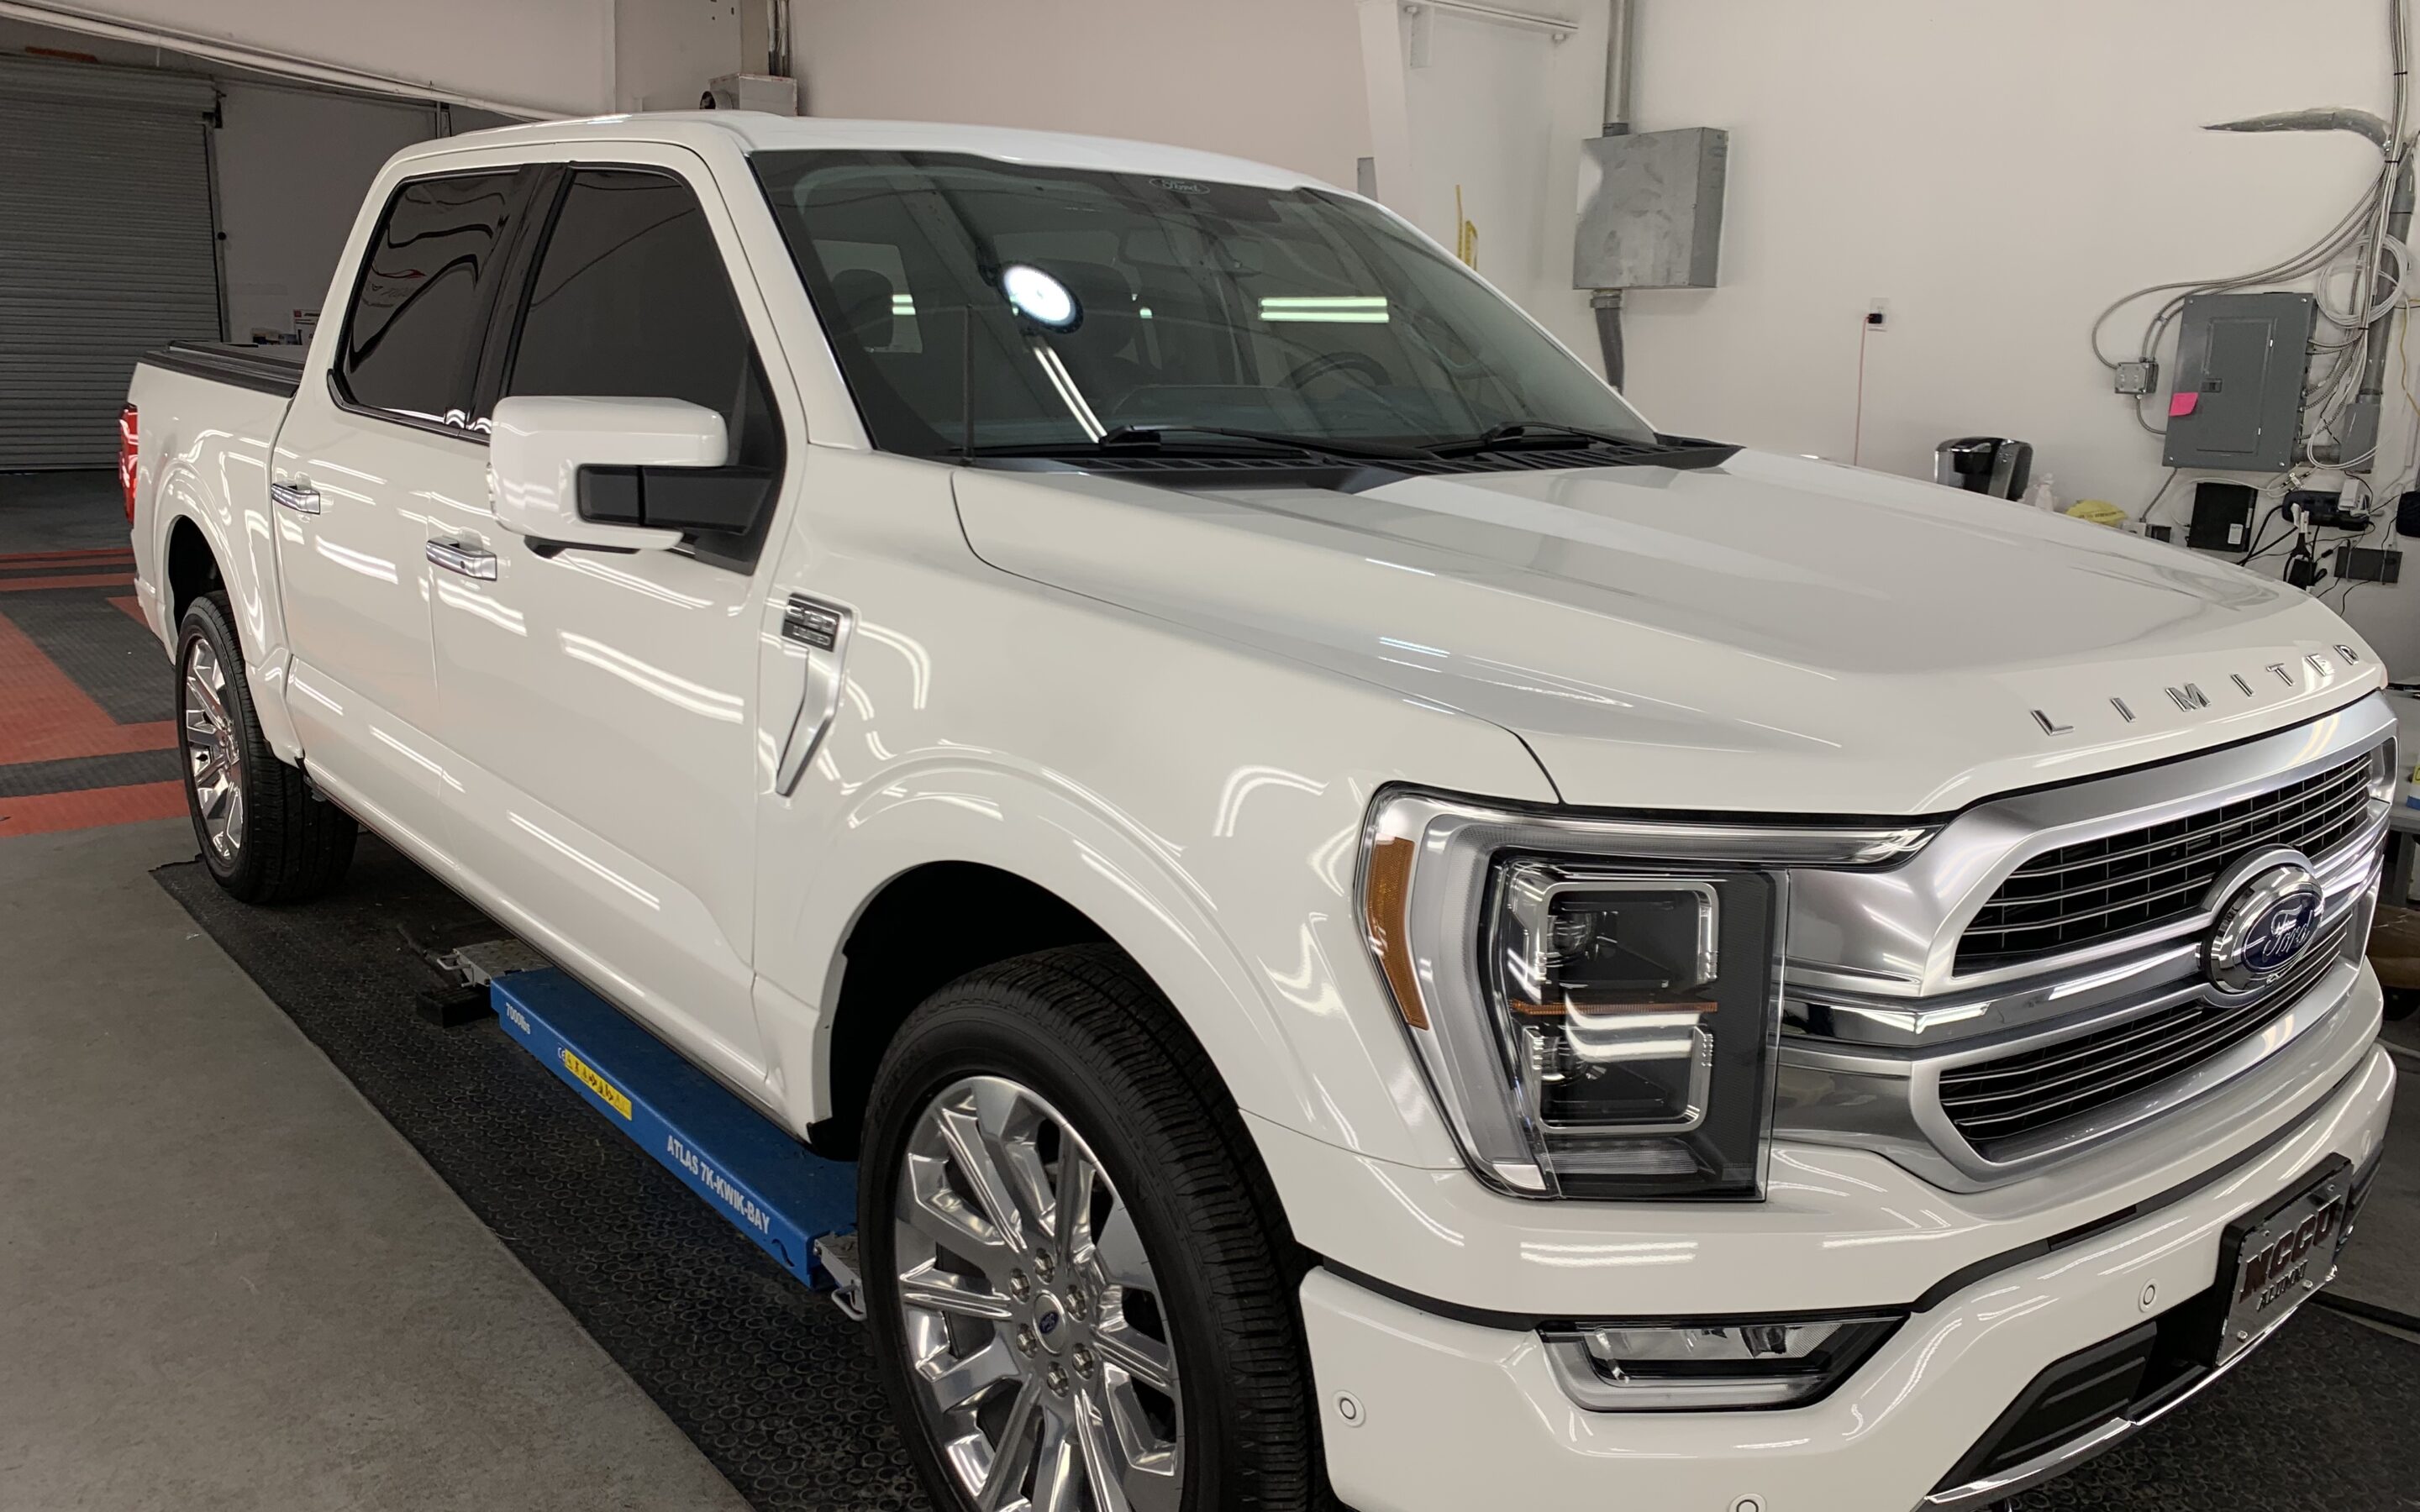 New Car Preparation of a 2022 Ford F-Series